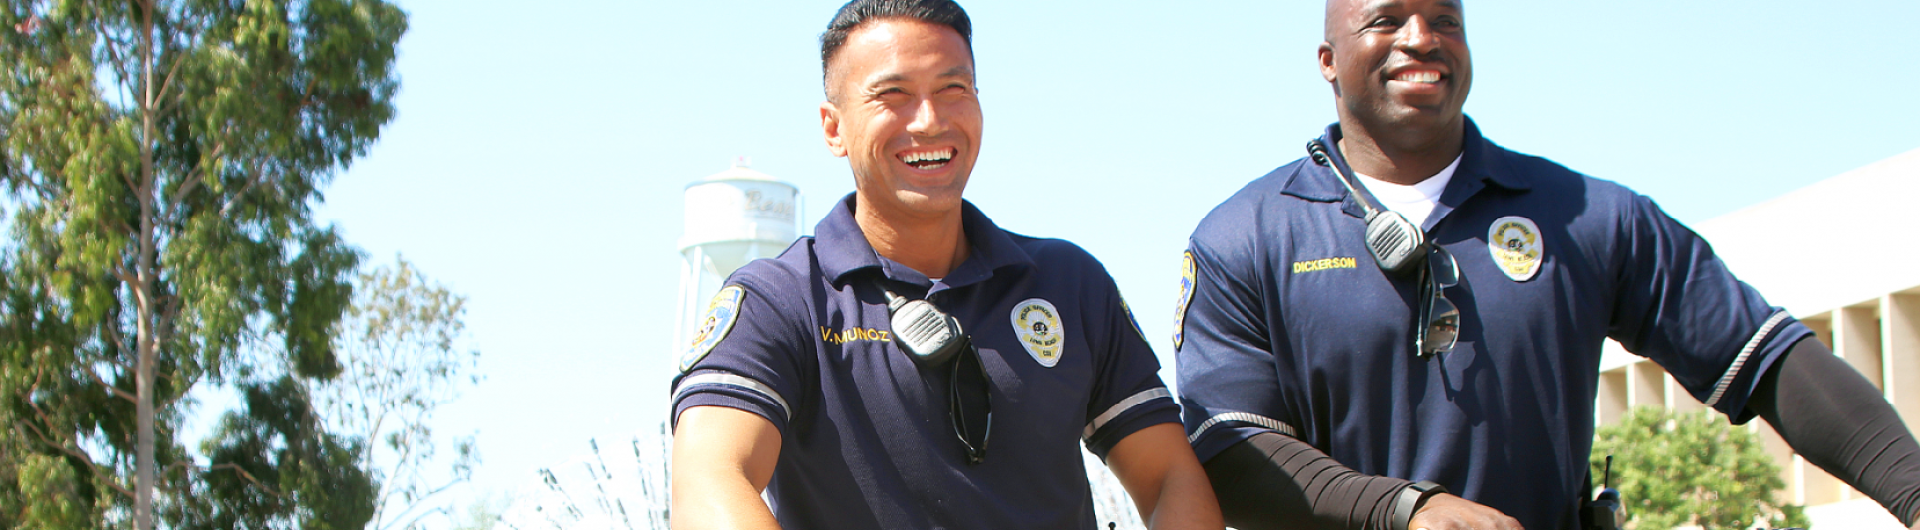 Two University Police Department Officers